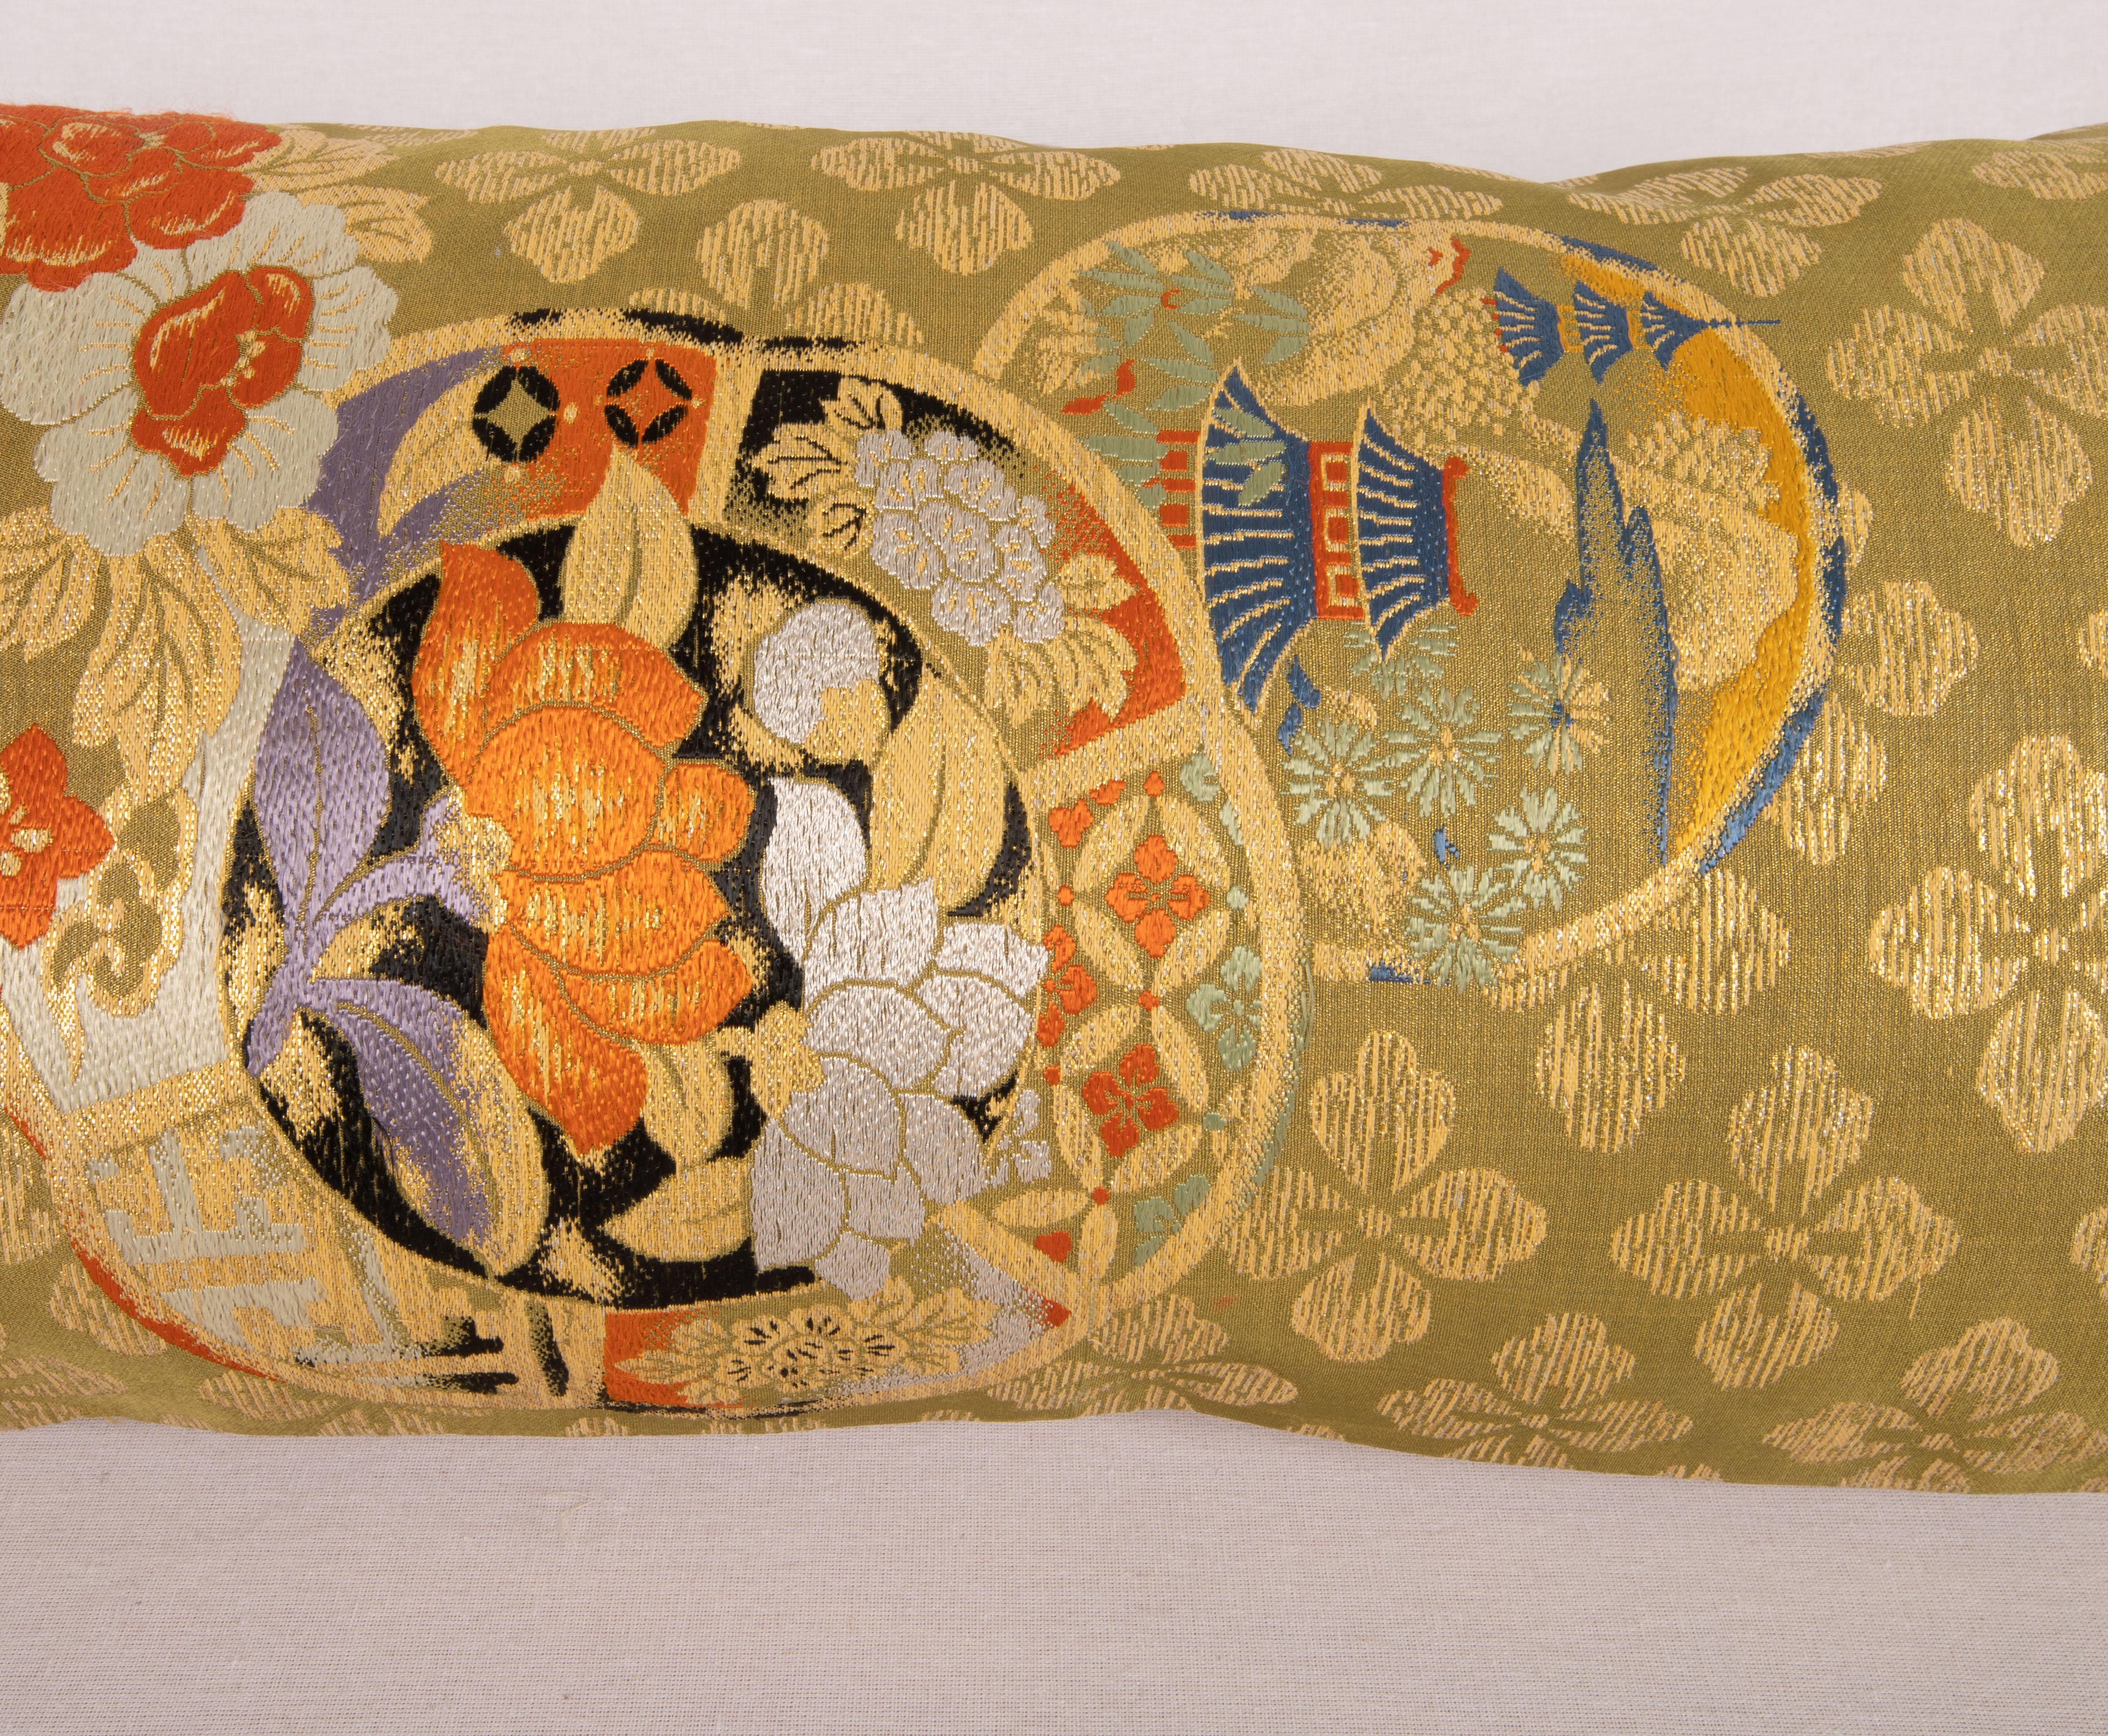 Hand-Woven Obi Pillow Cover, Japan, Mid 20th C.